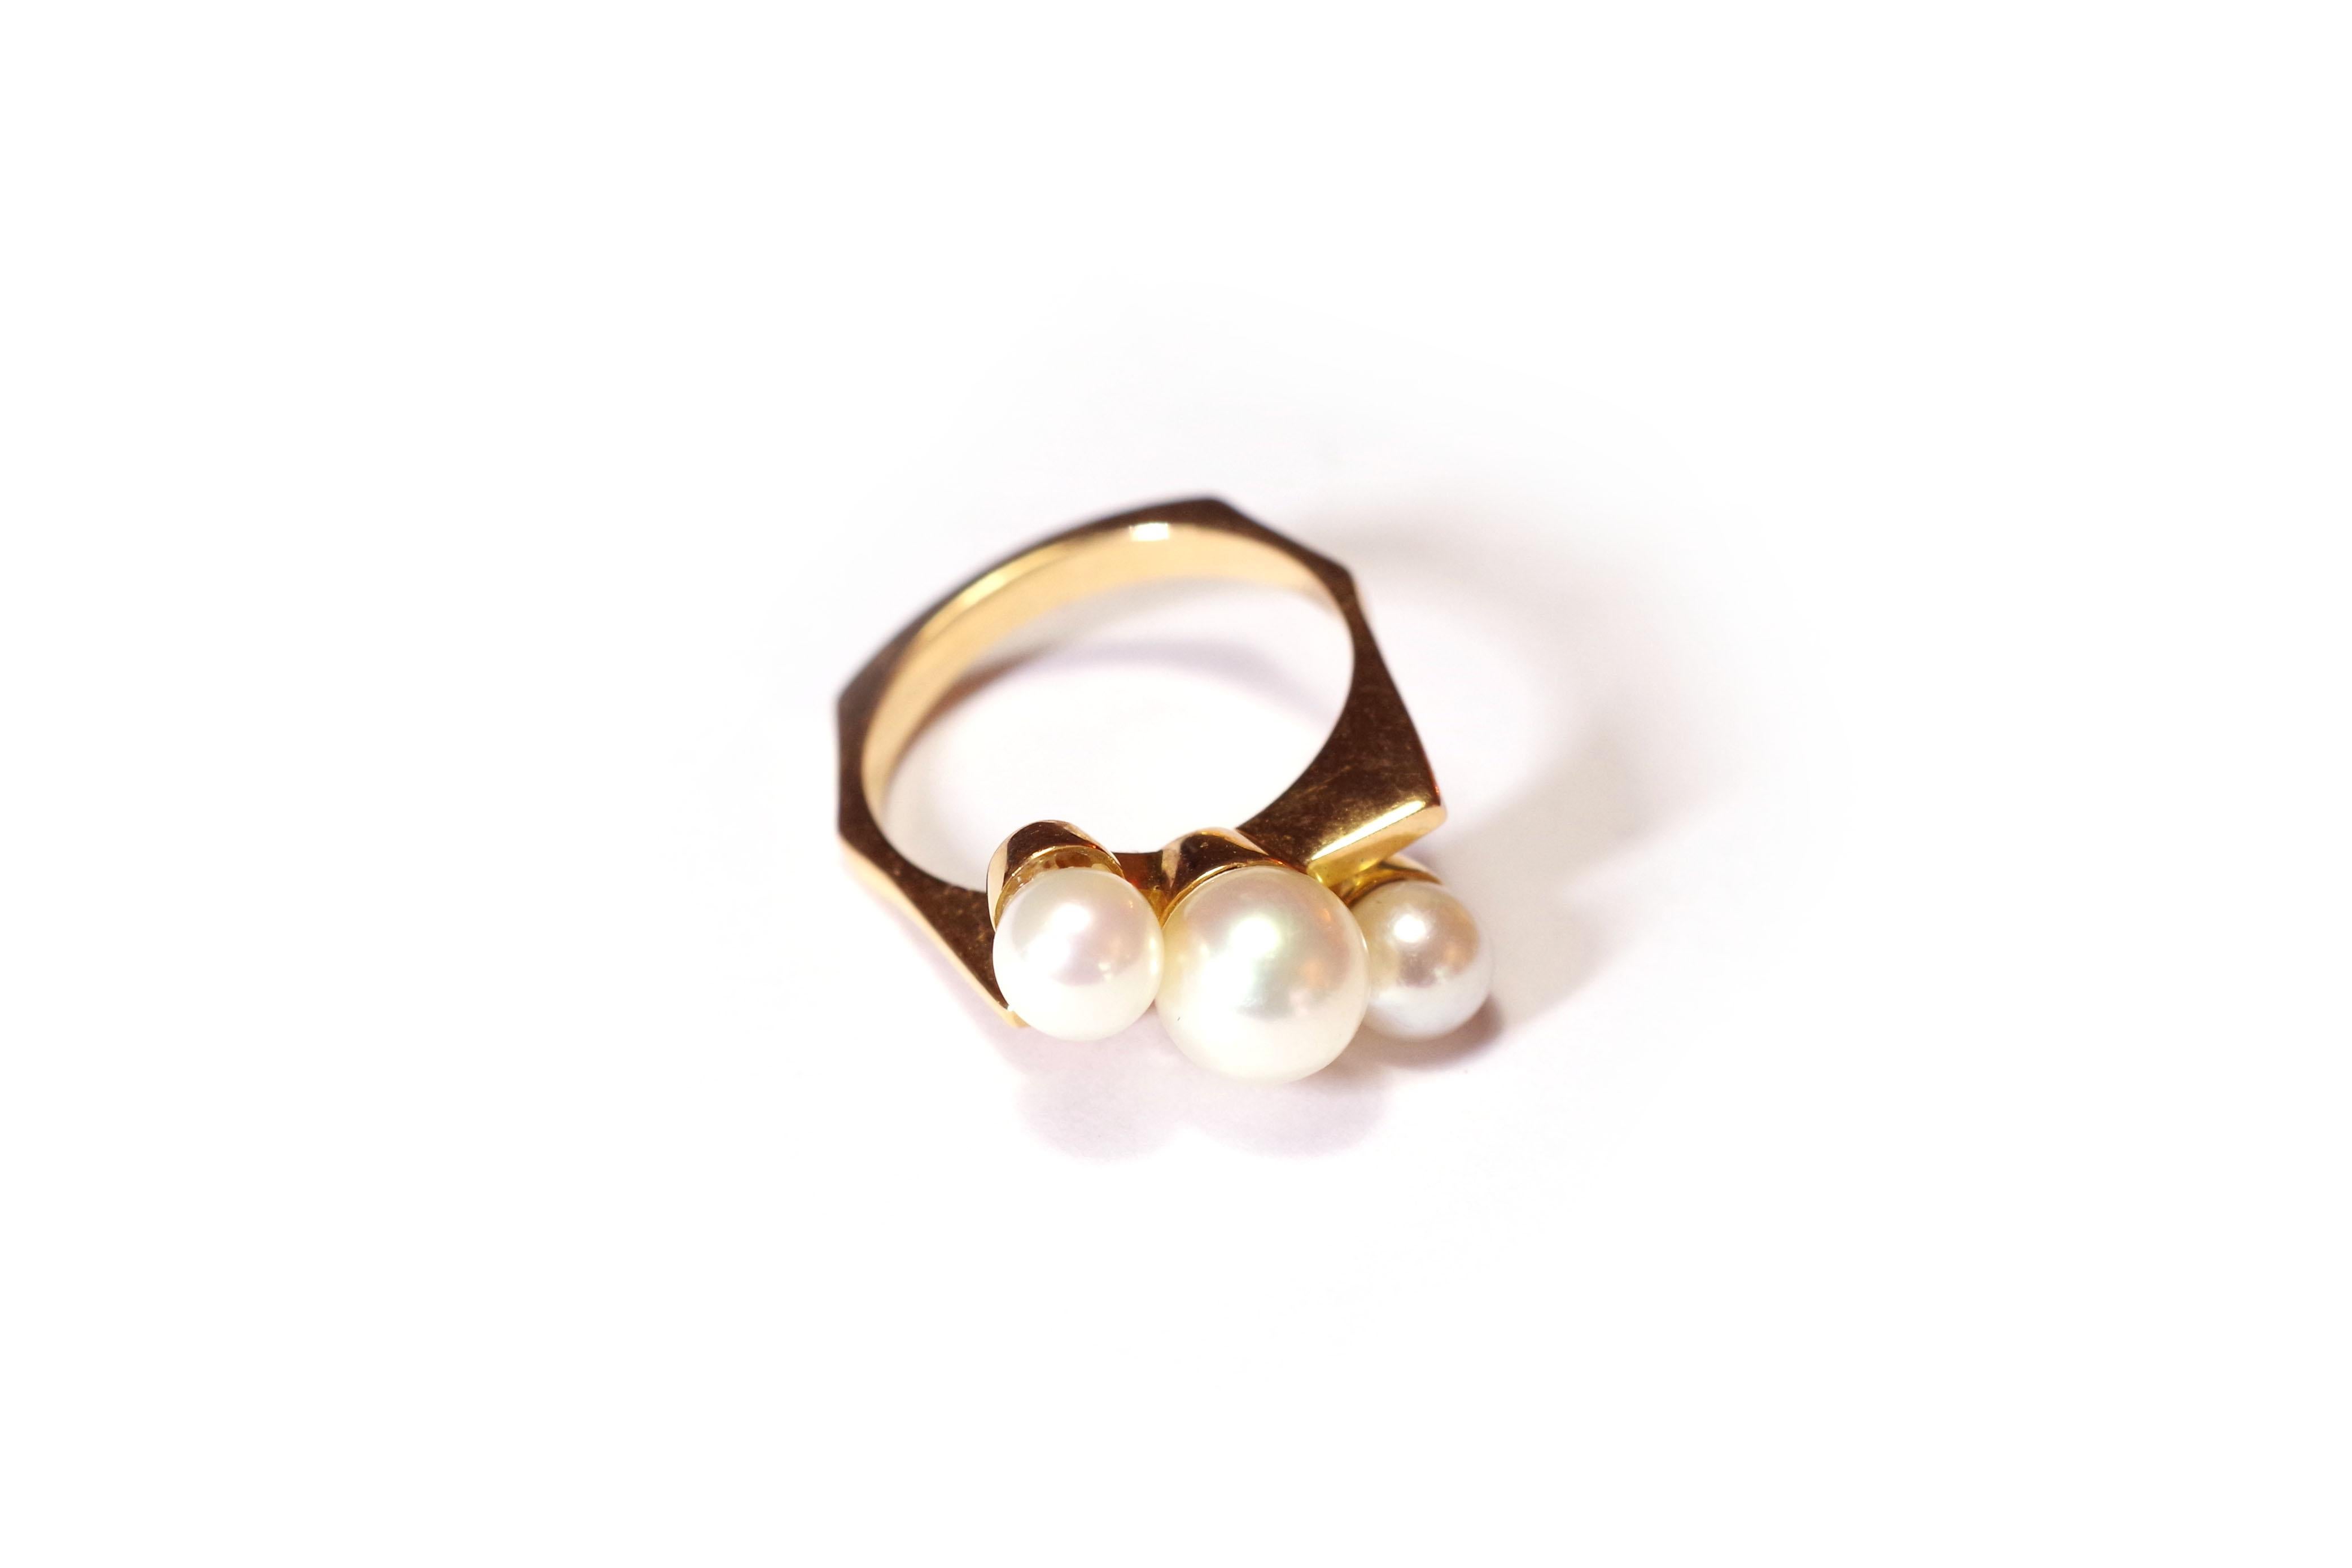 Modernist pearl ring in 18 karat yellow gold centred with three white cultured pearls forming a diagonal. The ring adopts a hexagonal shape. French ring of the second half of the 20th century.

Eagle's head hallmark and erased hallmark of the